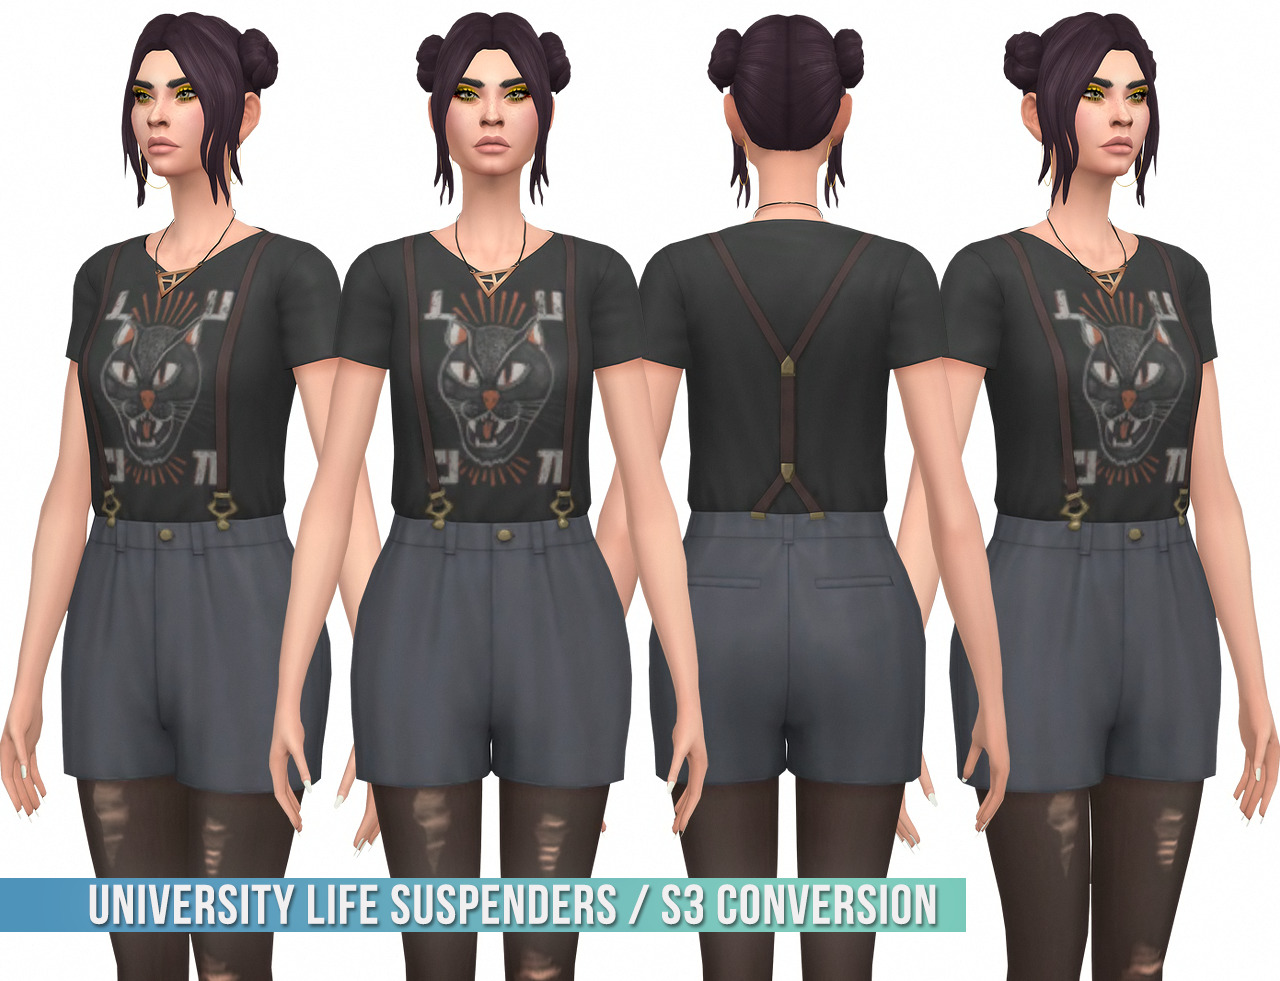 Suspender Accessory SIMS. High Waisted outfit with Suspenders SIMS 3. Фирма стате Юниверсити платья. Конвертация мода